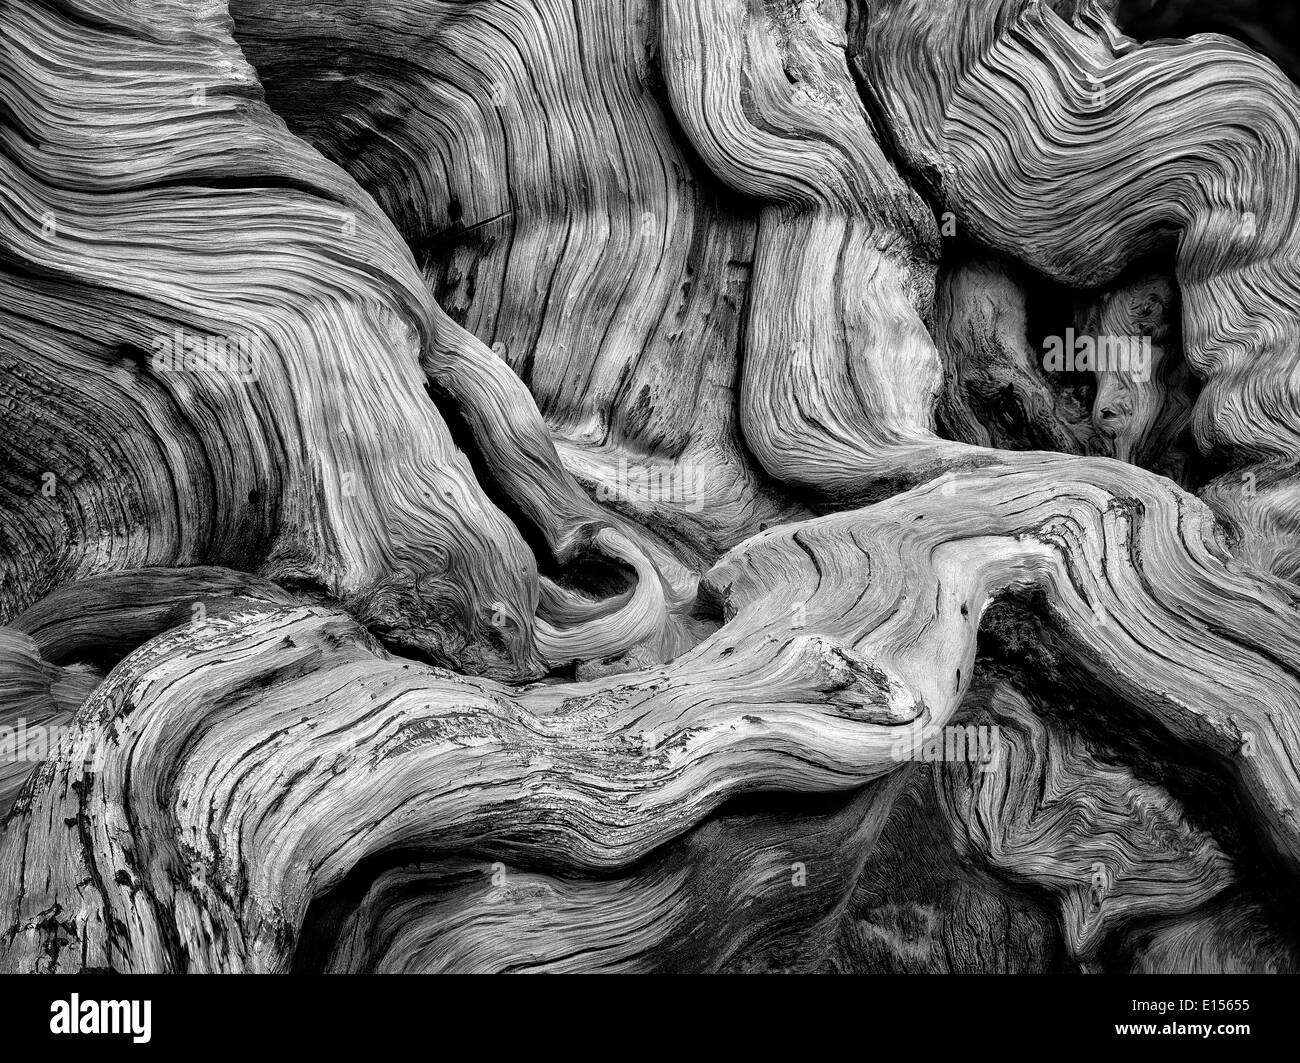 Gnarled exposed roots of Bristlecone Pine Tree. Ancient Bristlecone Pine Forest, Inyo county, California Stock Photo